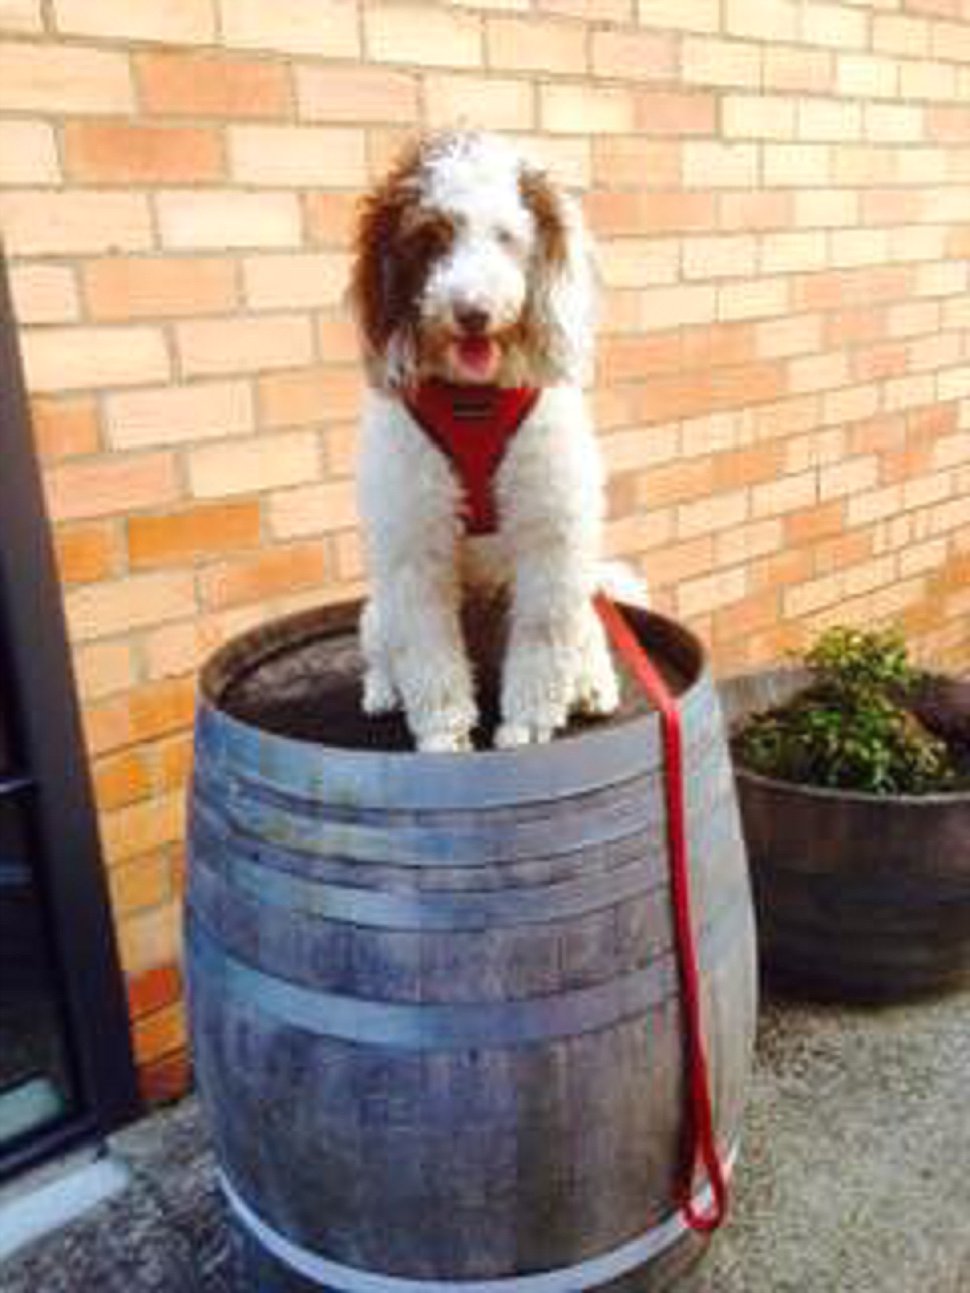 Yarra Valley Doggy Winery Tours #pawfect